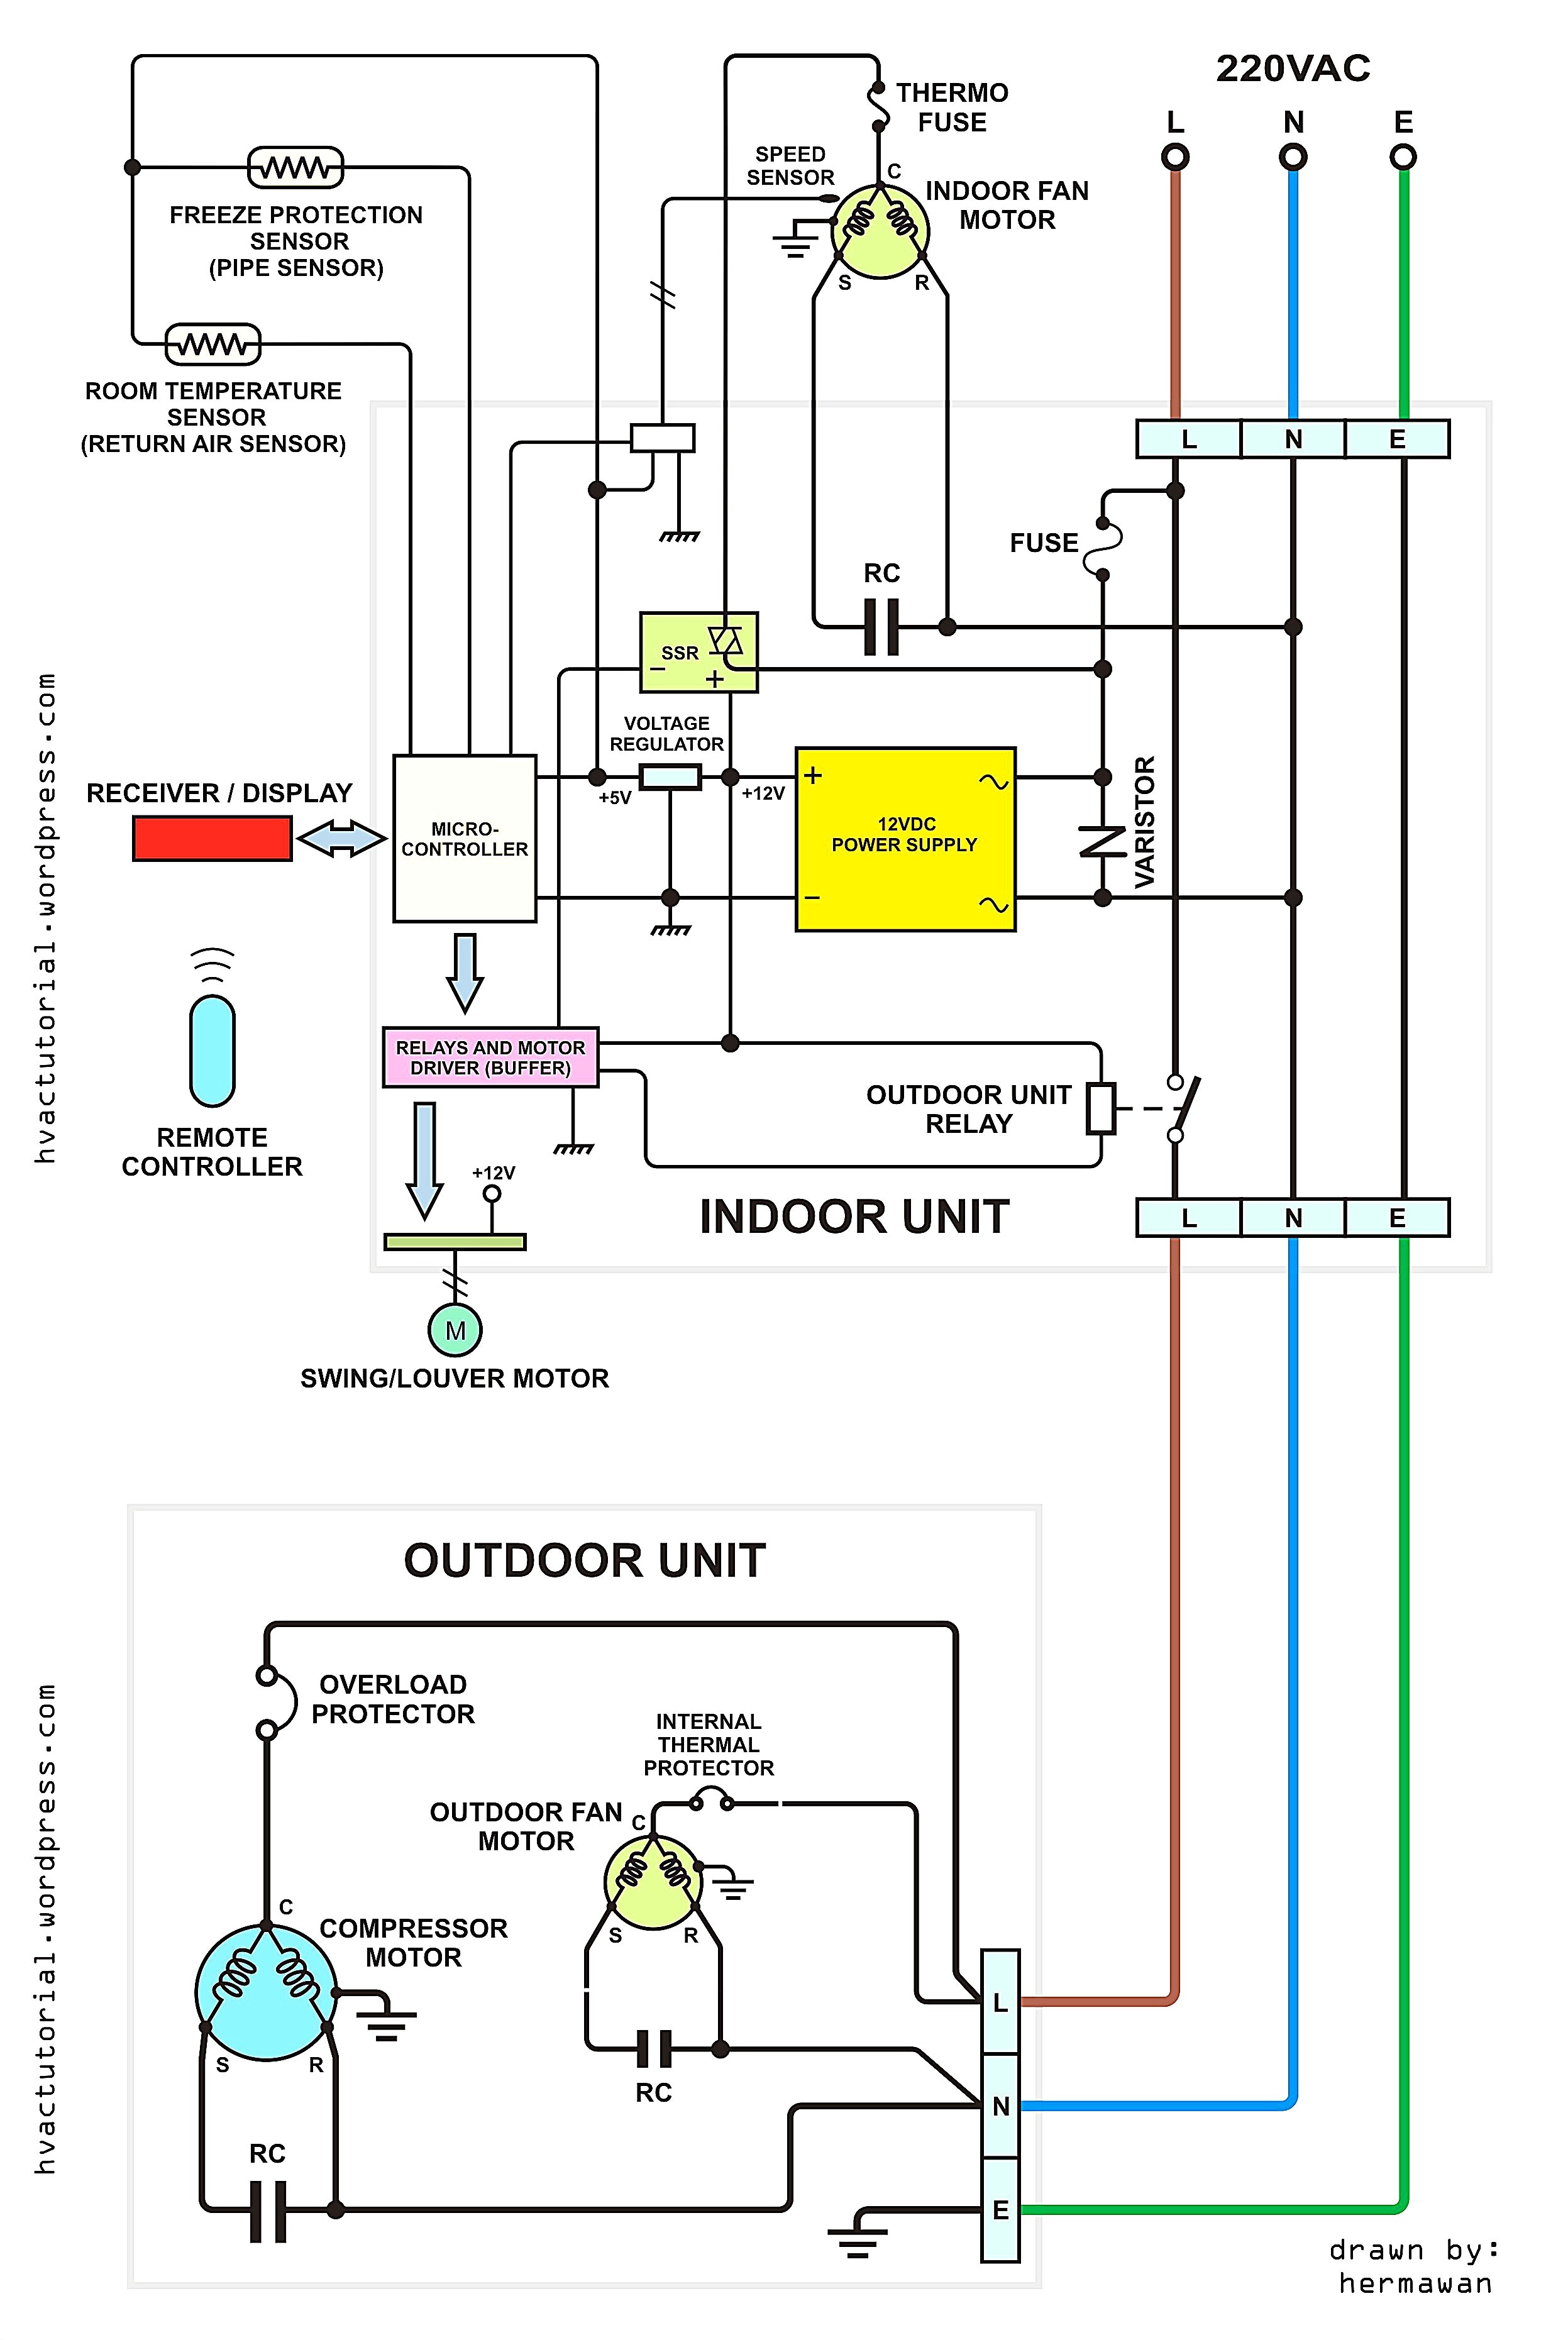 Heat Pump Thermostat Wiring Diagram Classy Shape Hvac Why Does Wires Going Within Carrier With